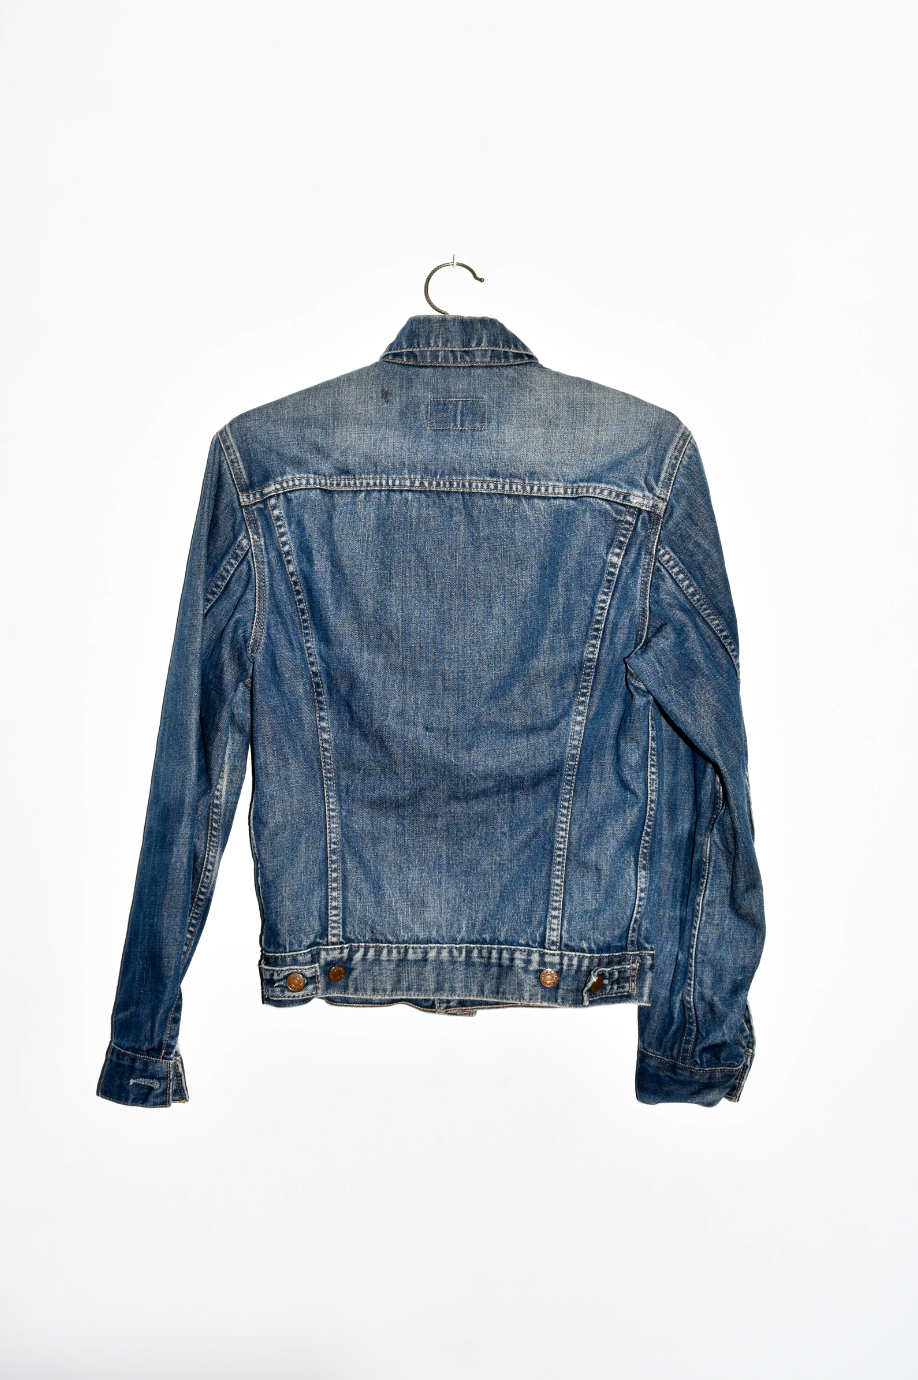 NEW IN! Levi's jacket